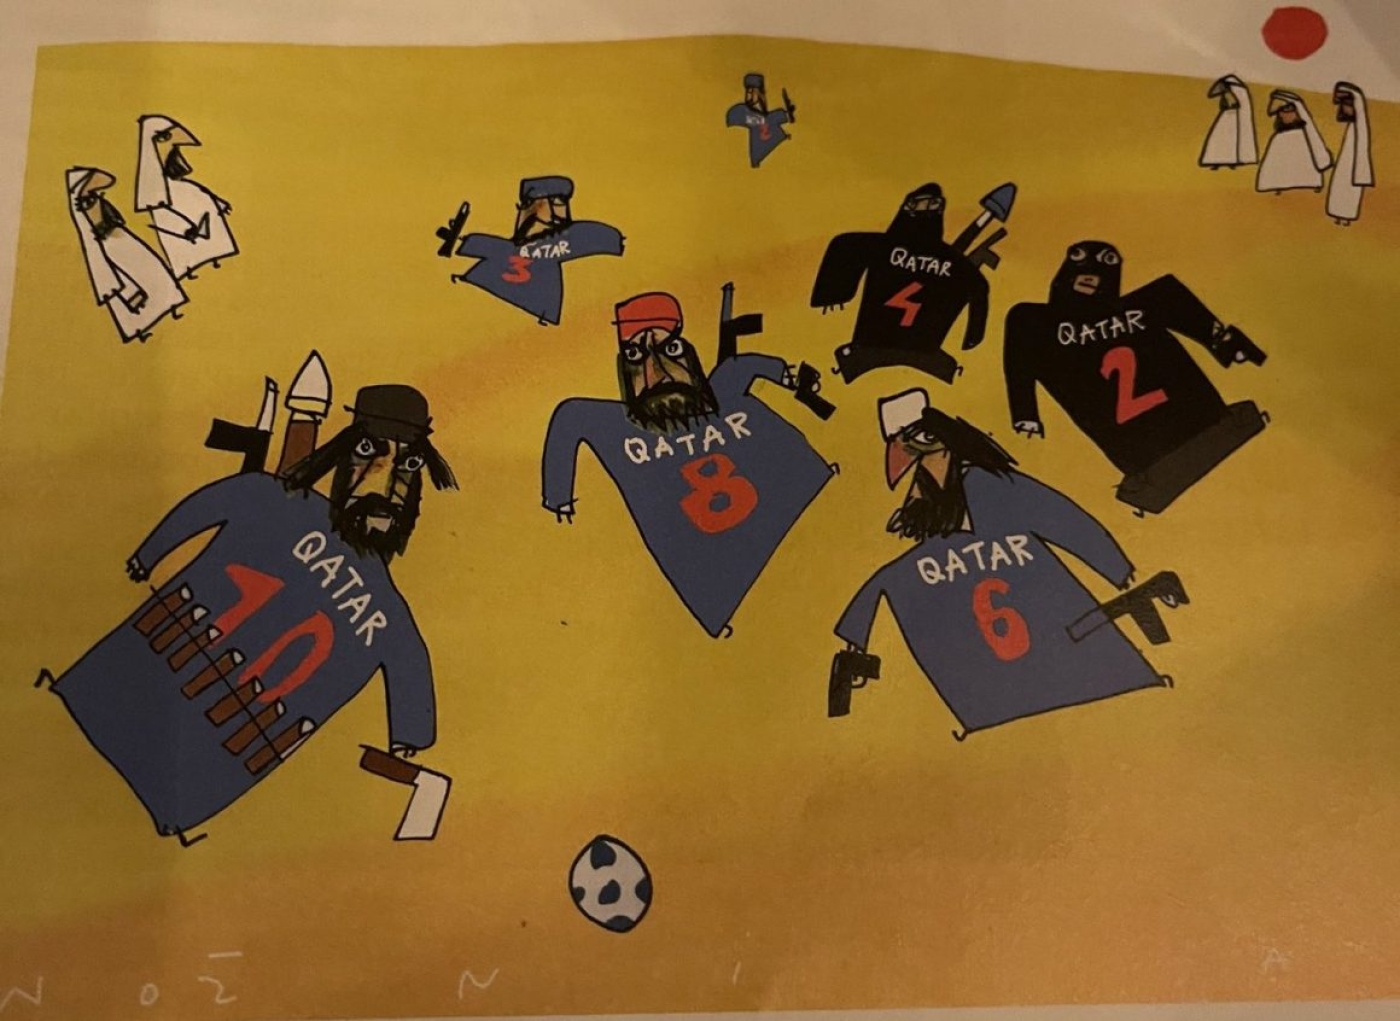 Caricature published by Le Canard enchainé in its October issues depicts Qatar's national team (Twitter/screengrab)